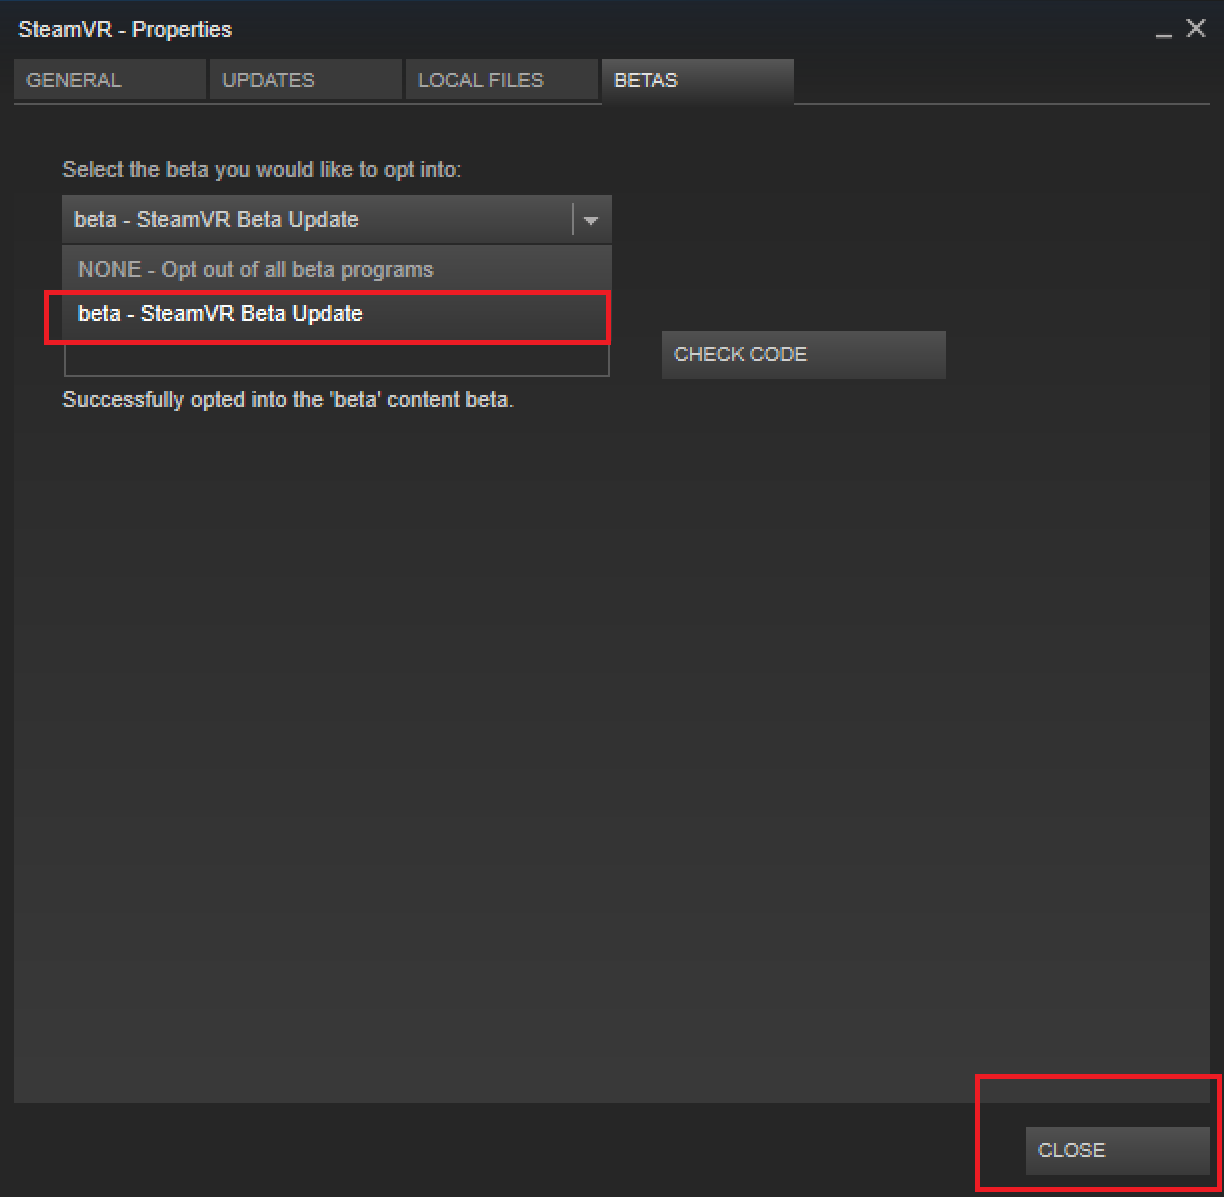 Switch to the SteamVR beta in the properties dialog for SteamVR